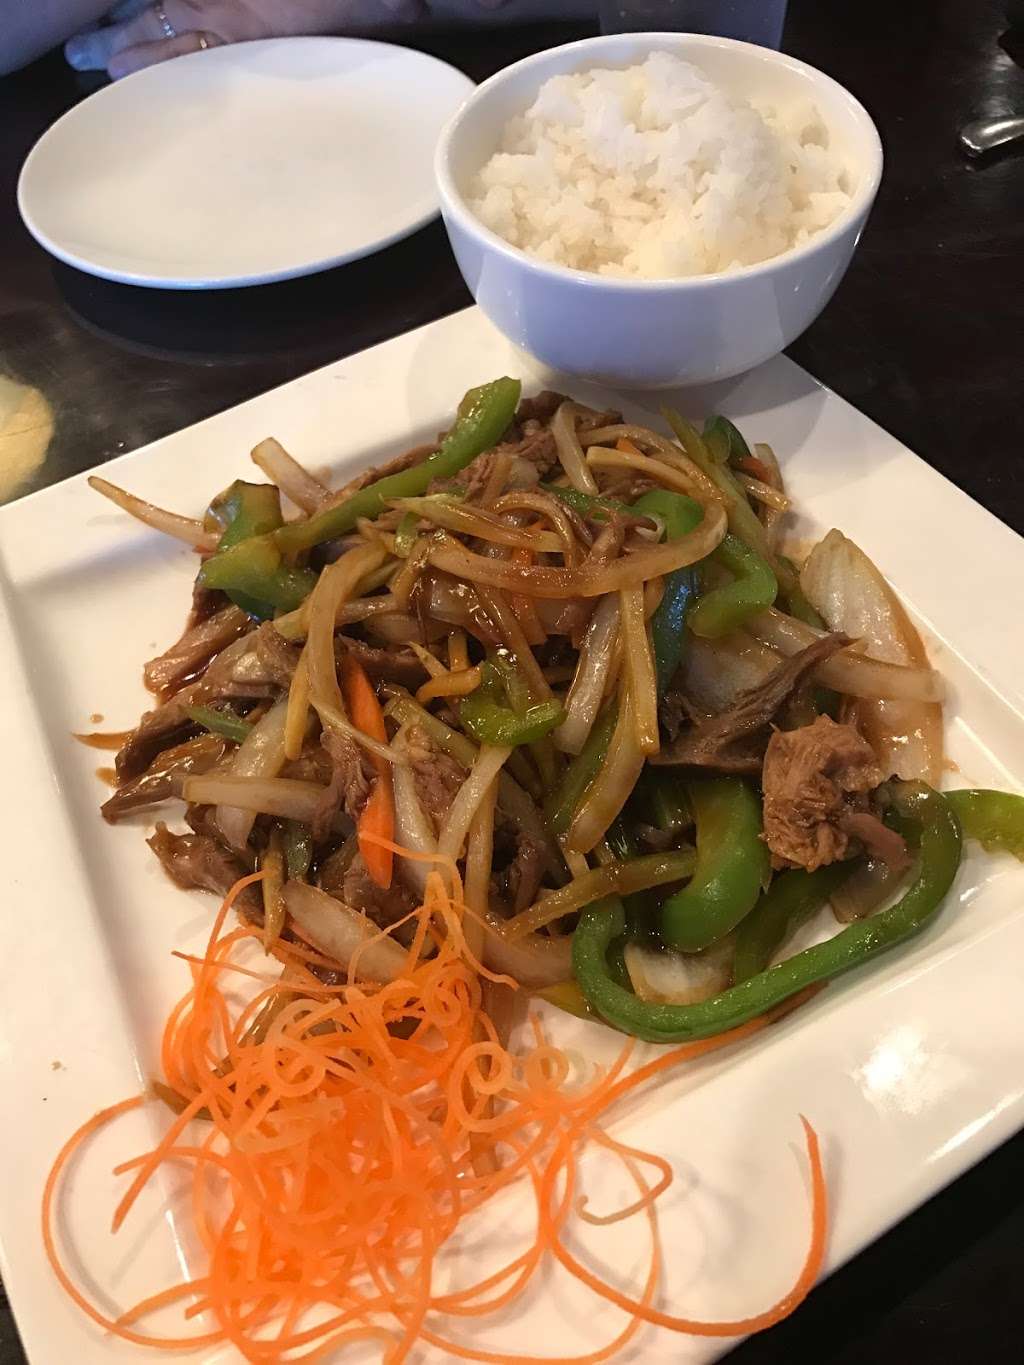 Pan Asia | 416 S Main St, Forked River, NJ 08731 | Phone: (609) 242-1232